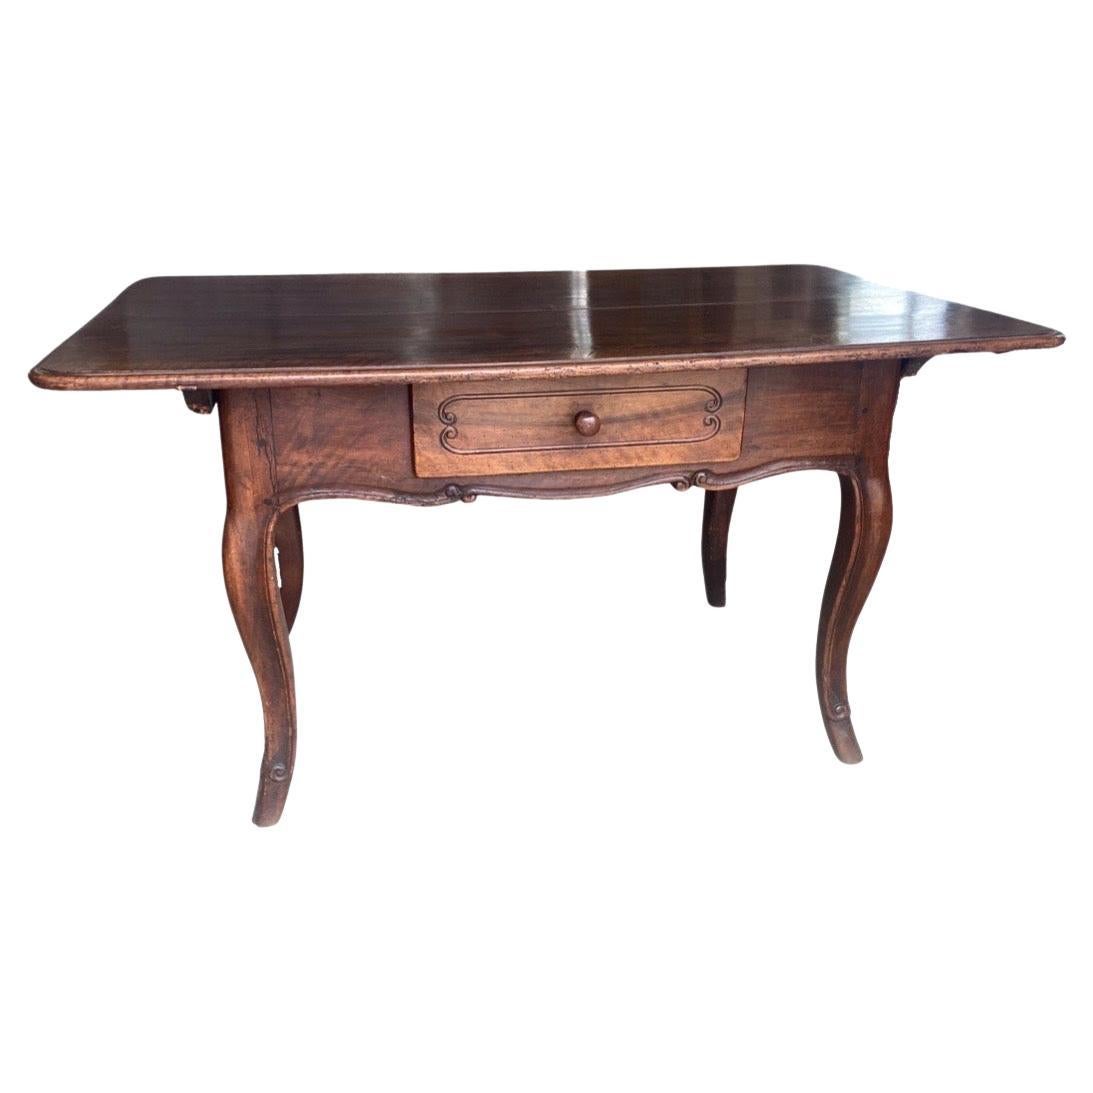 19th Century French Walnut Kitchen Table/ Dining Table